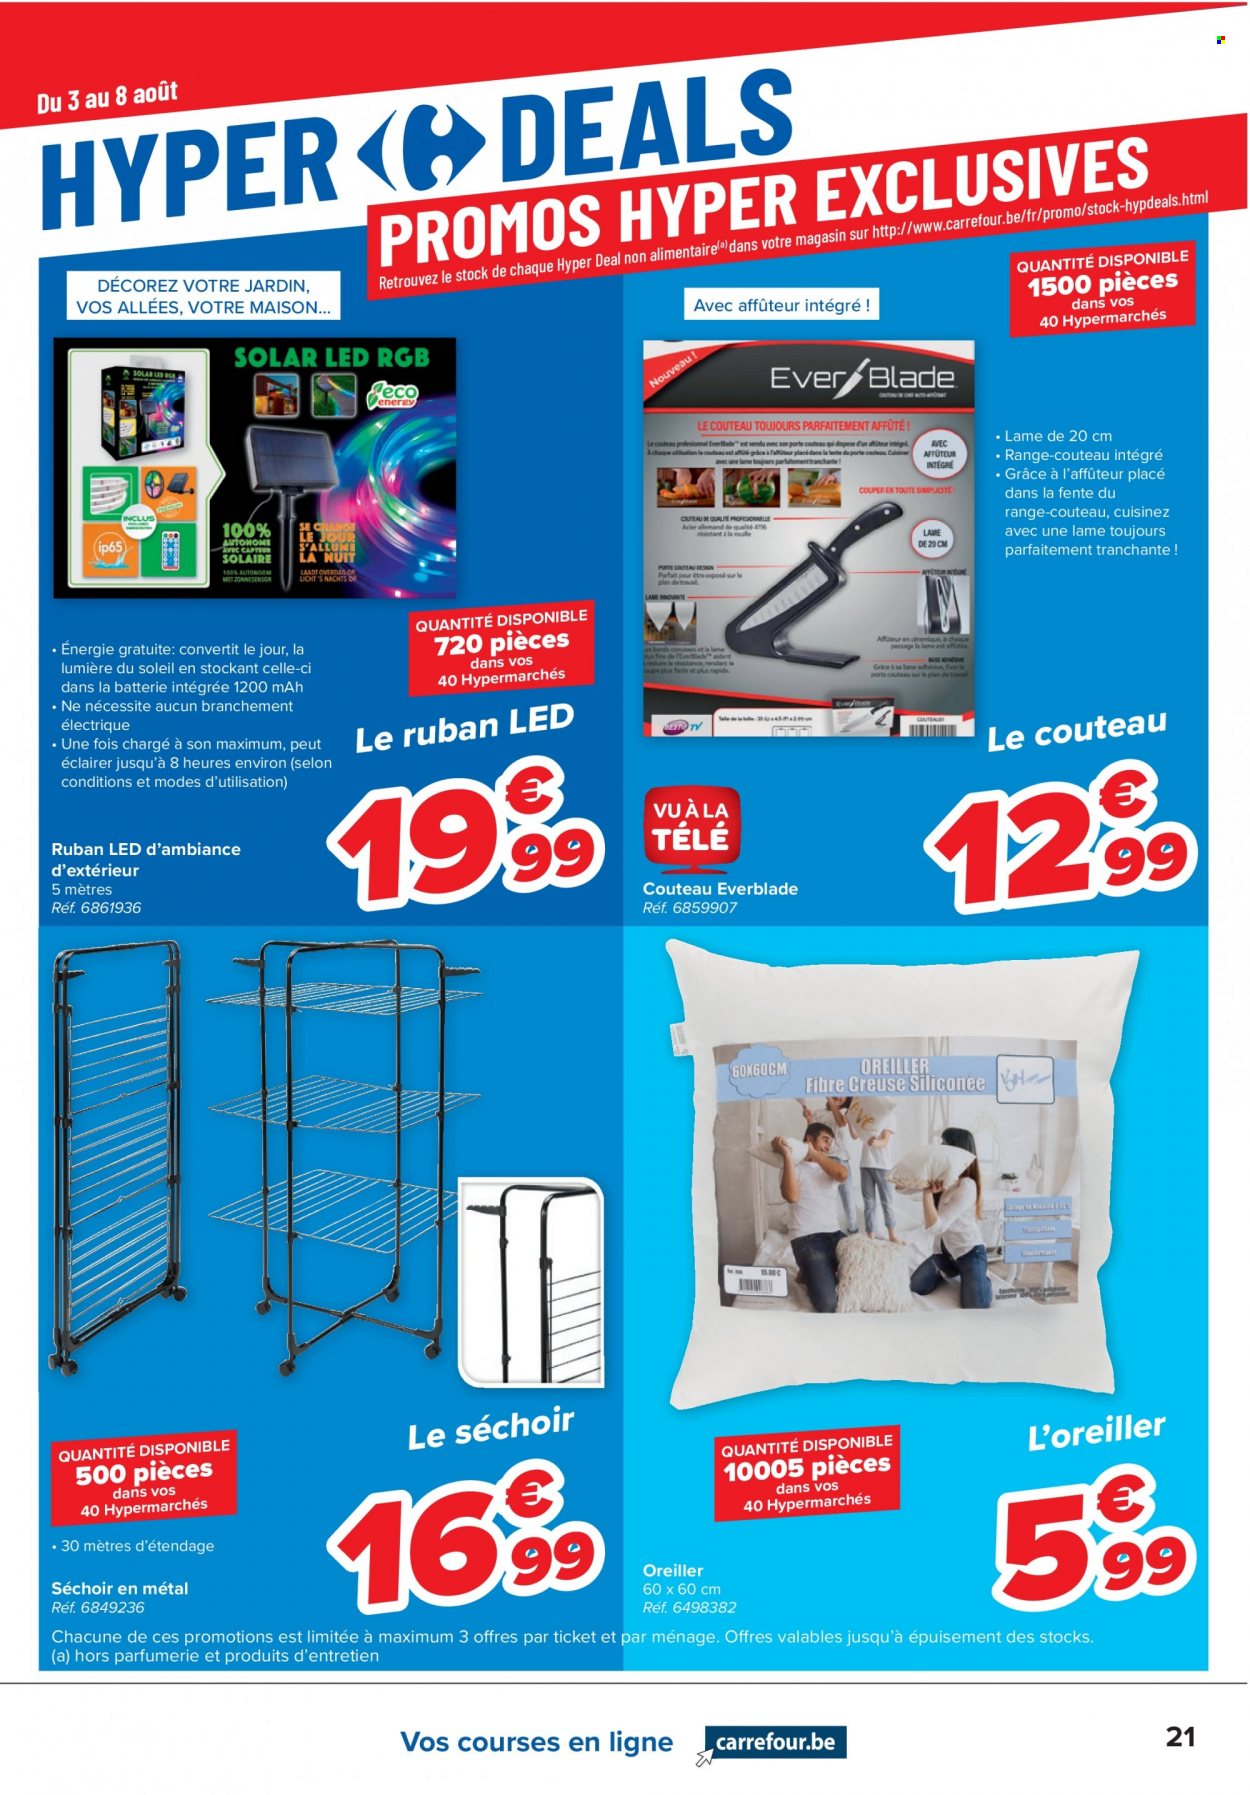 Catalogue Carrefour hypermarkt - 3.8.2022 - 16.8.2022. Page 21.